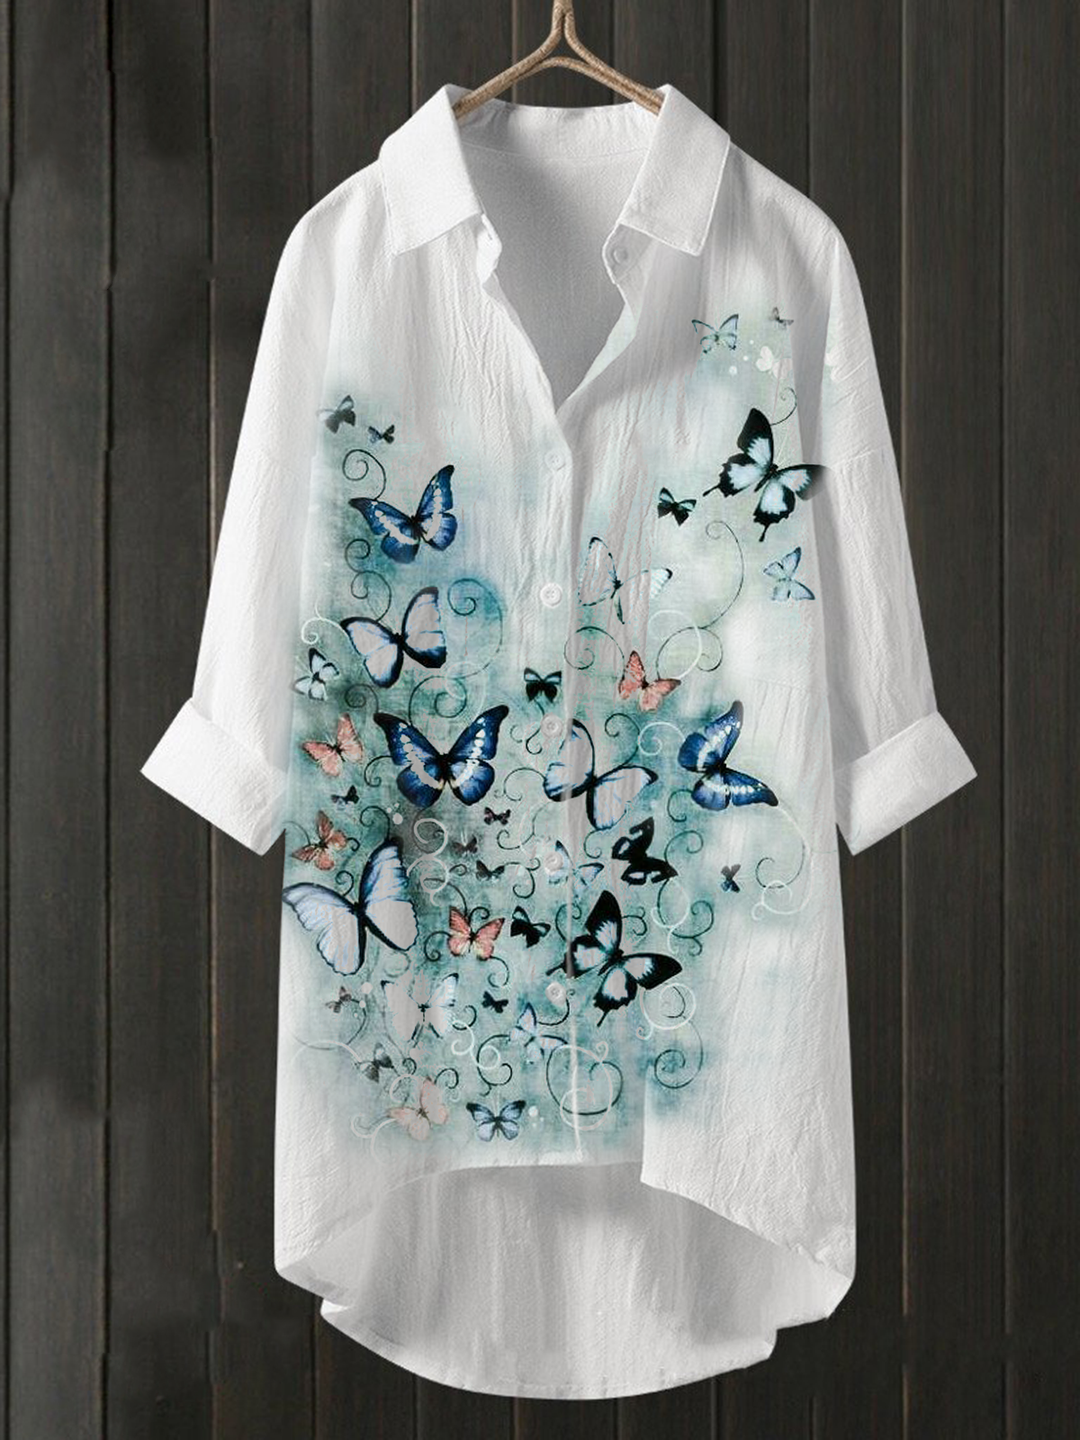 Vintage Butterfly Print Casual Shirt